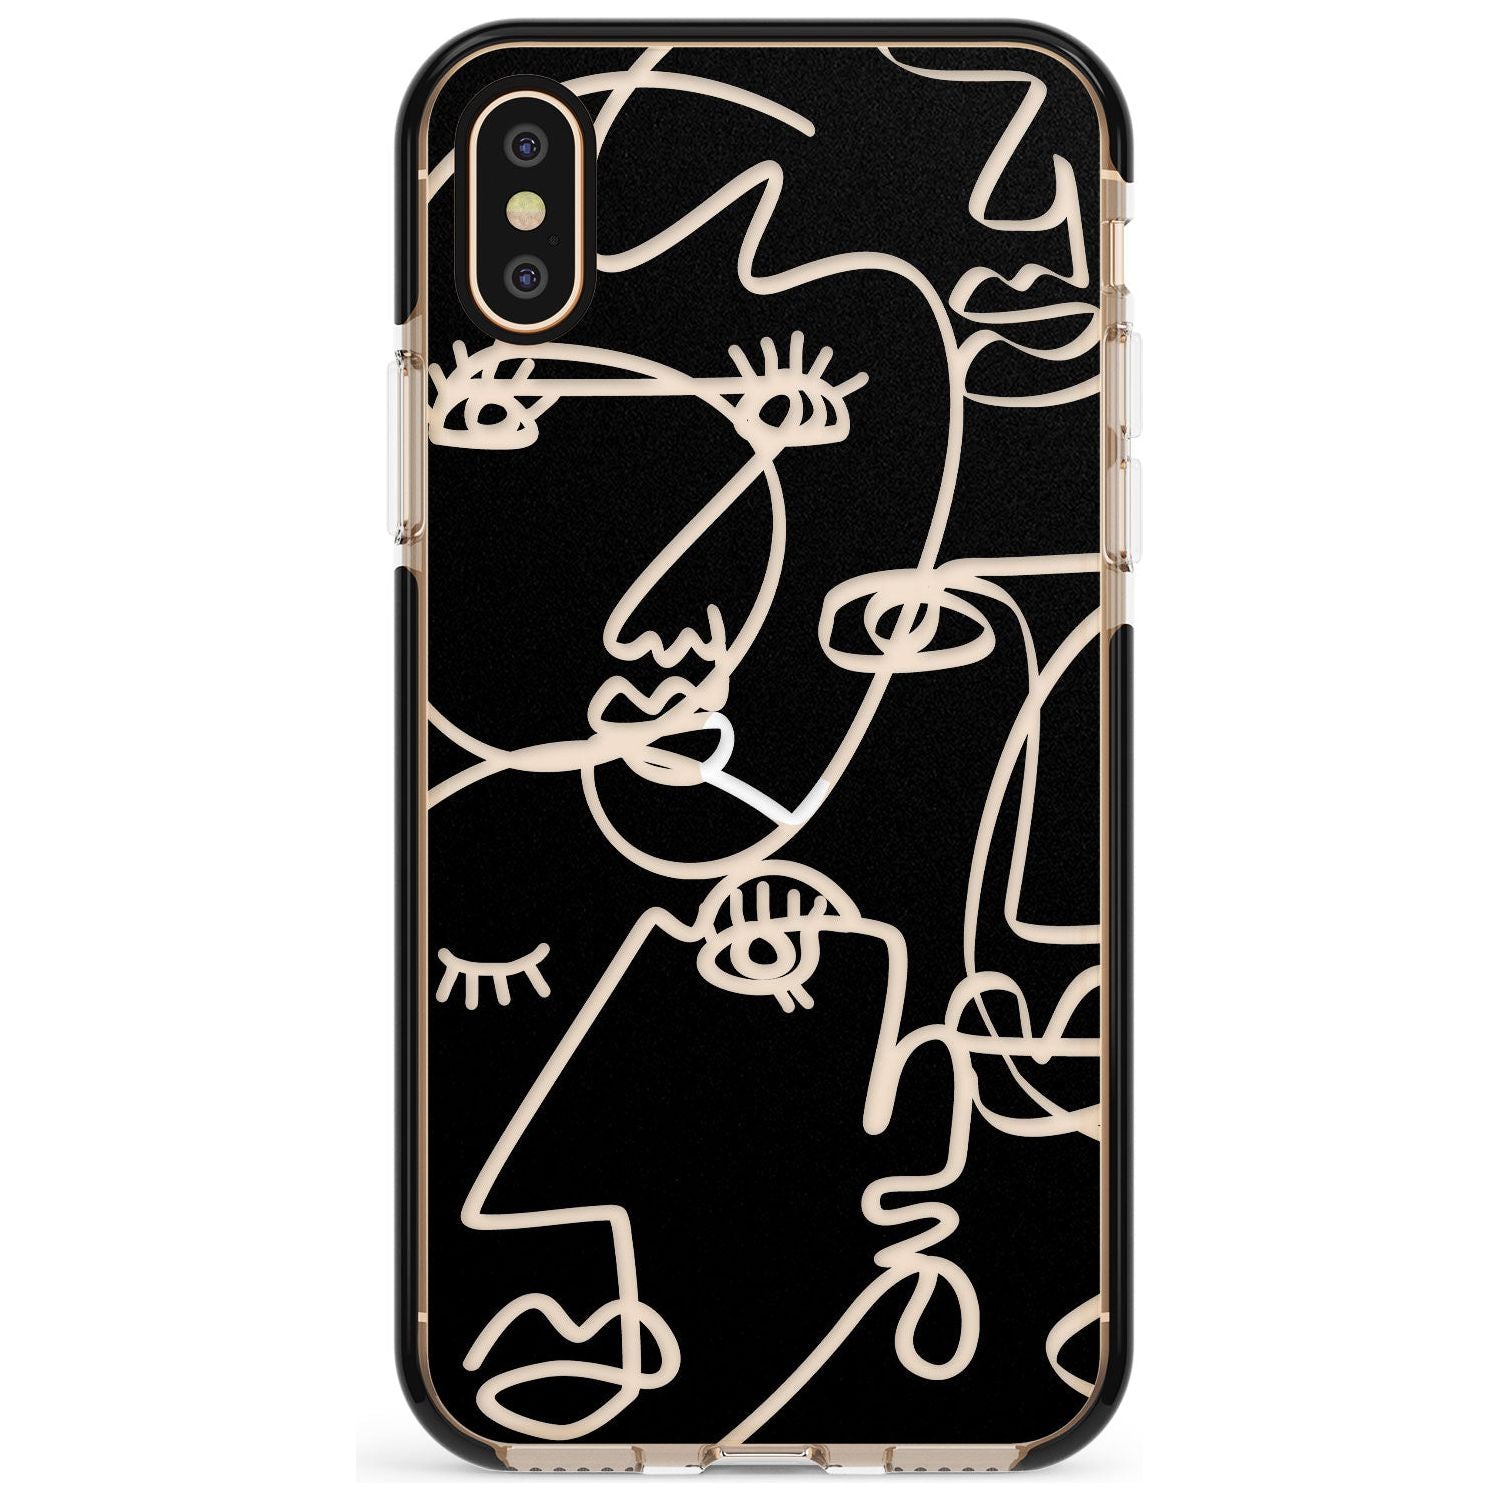 Continuous Line Faces: Clear on Black Pink Fade Impact Phone Case for iPhone X XS Max XR